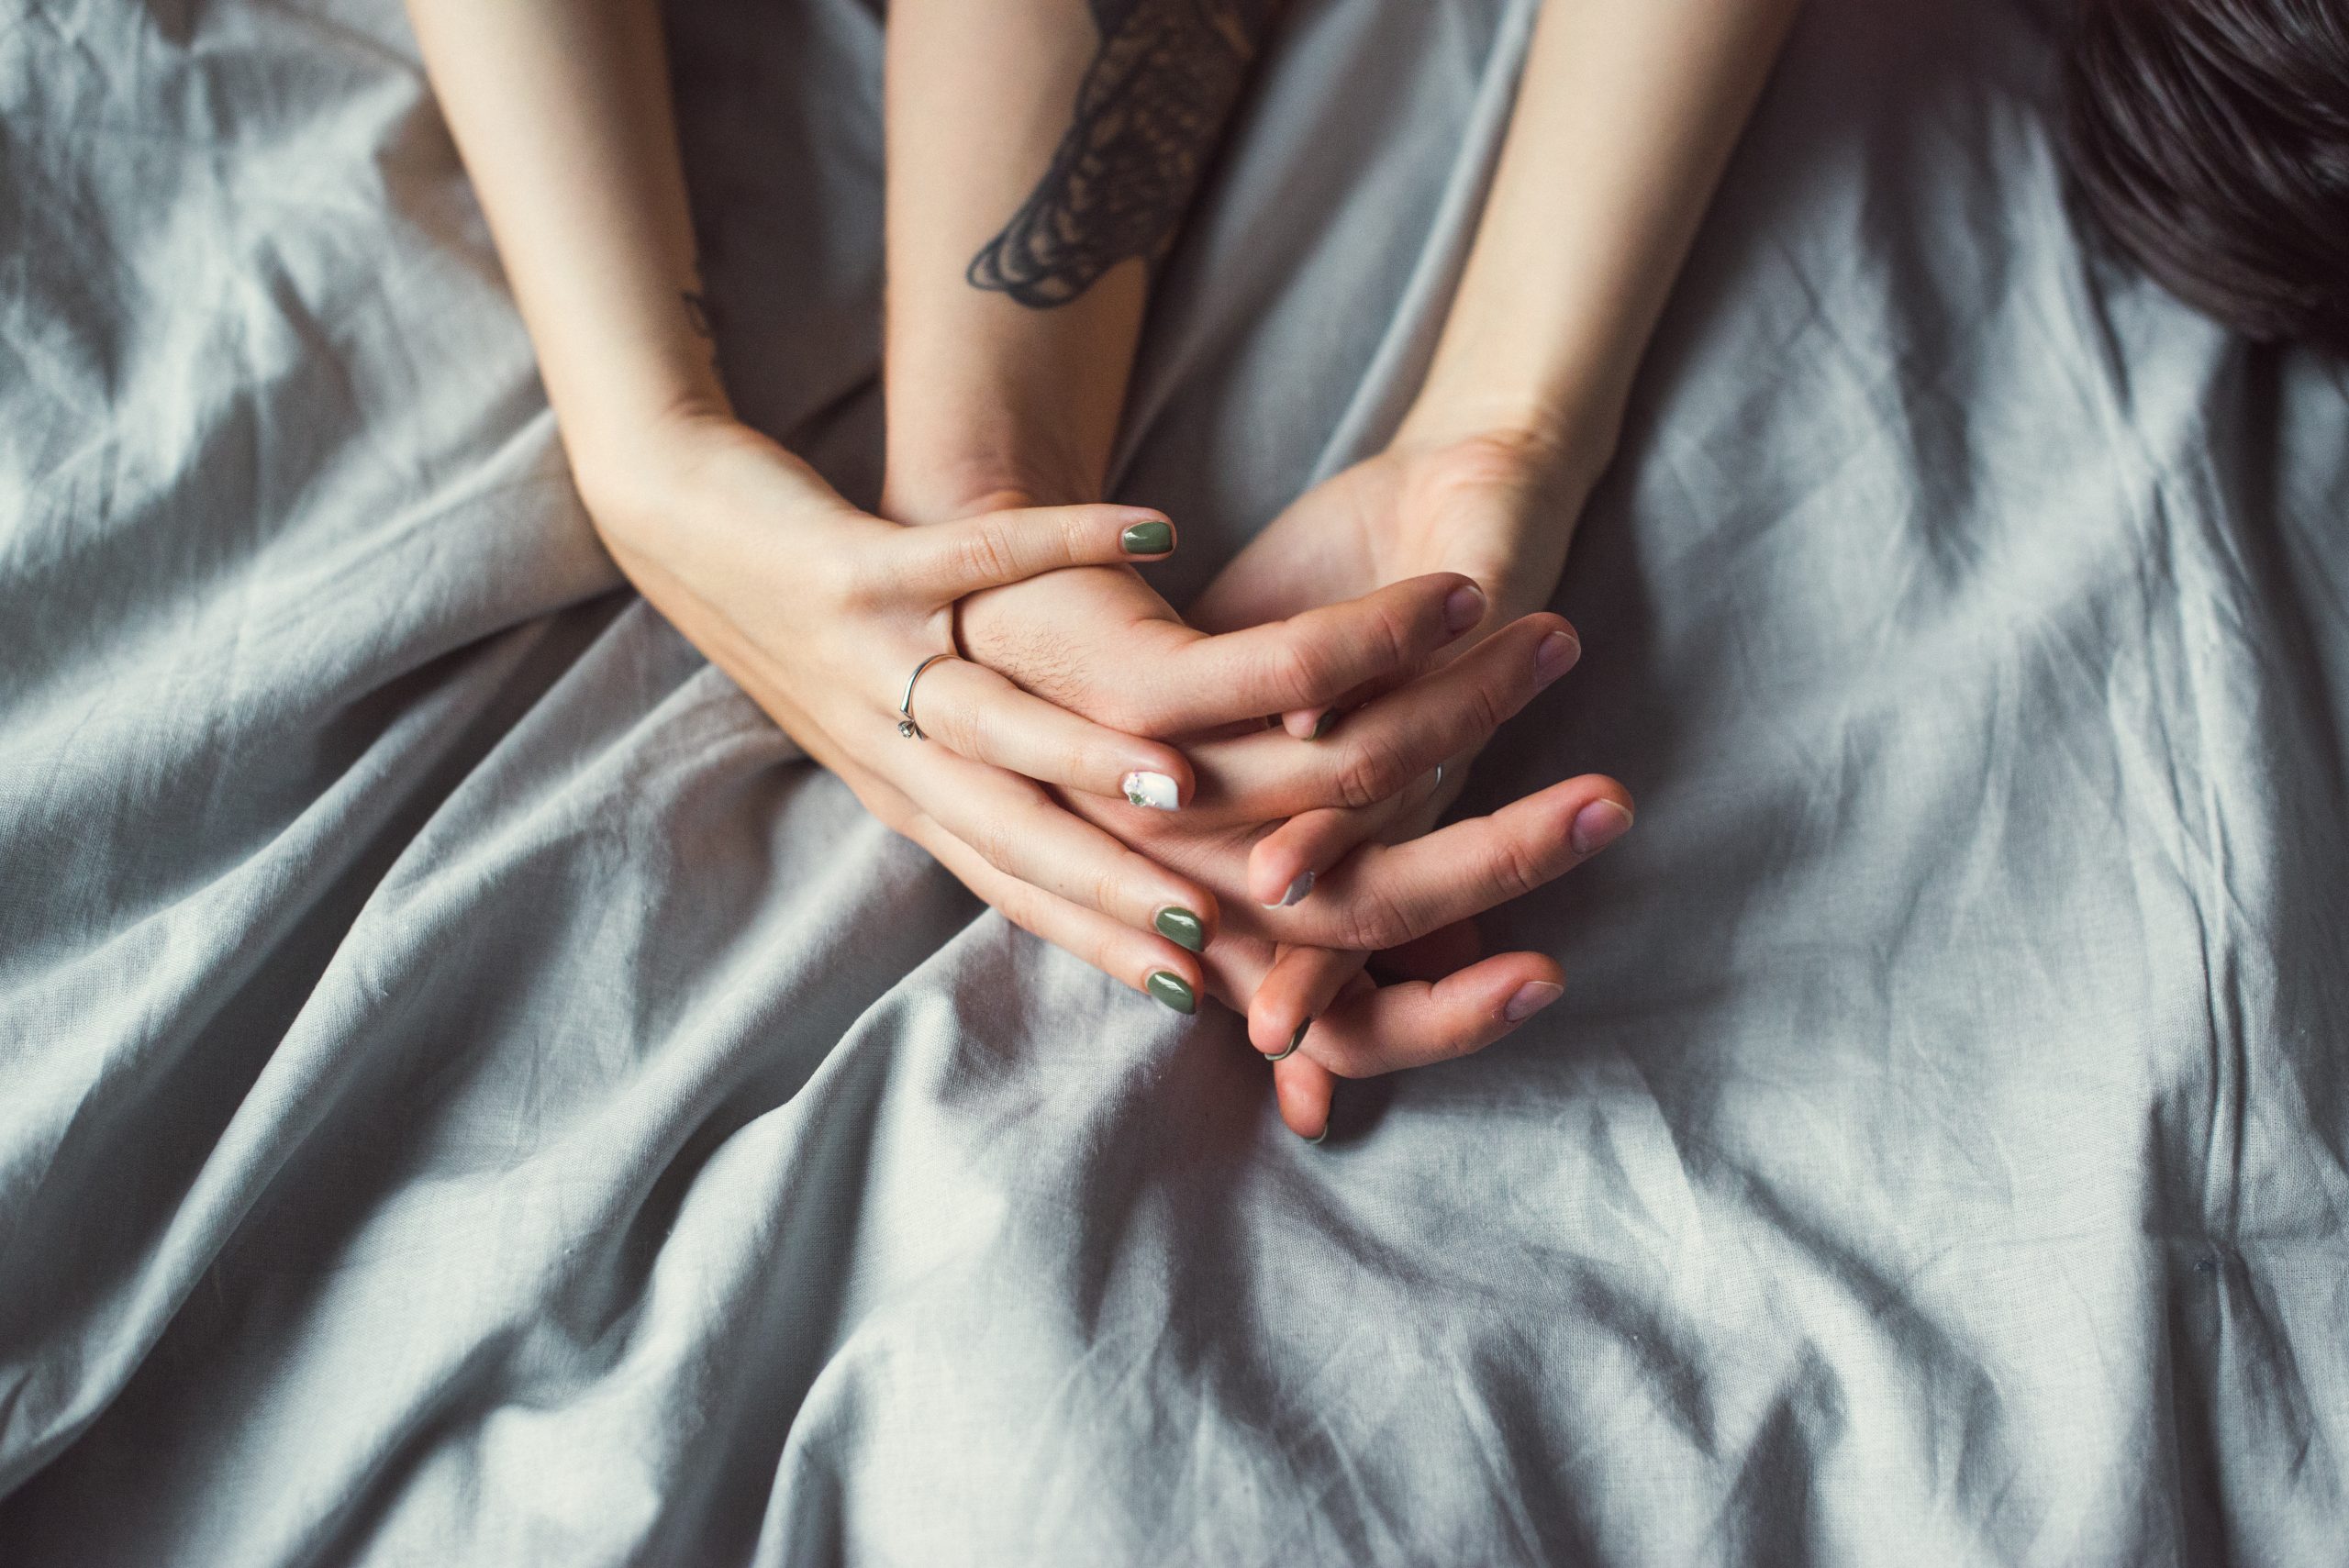 Close,Up,Shot,Of,Woman,And,Man's,Hands,With,Tattoos